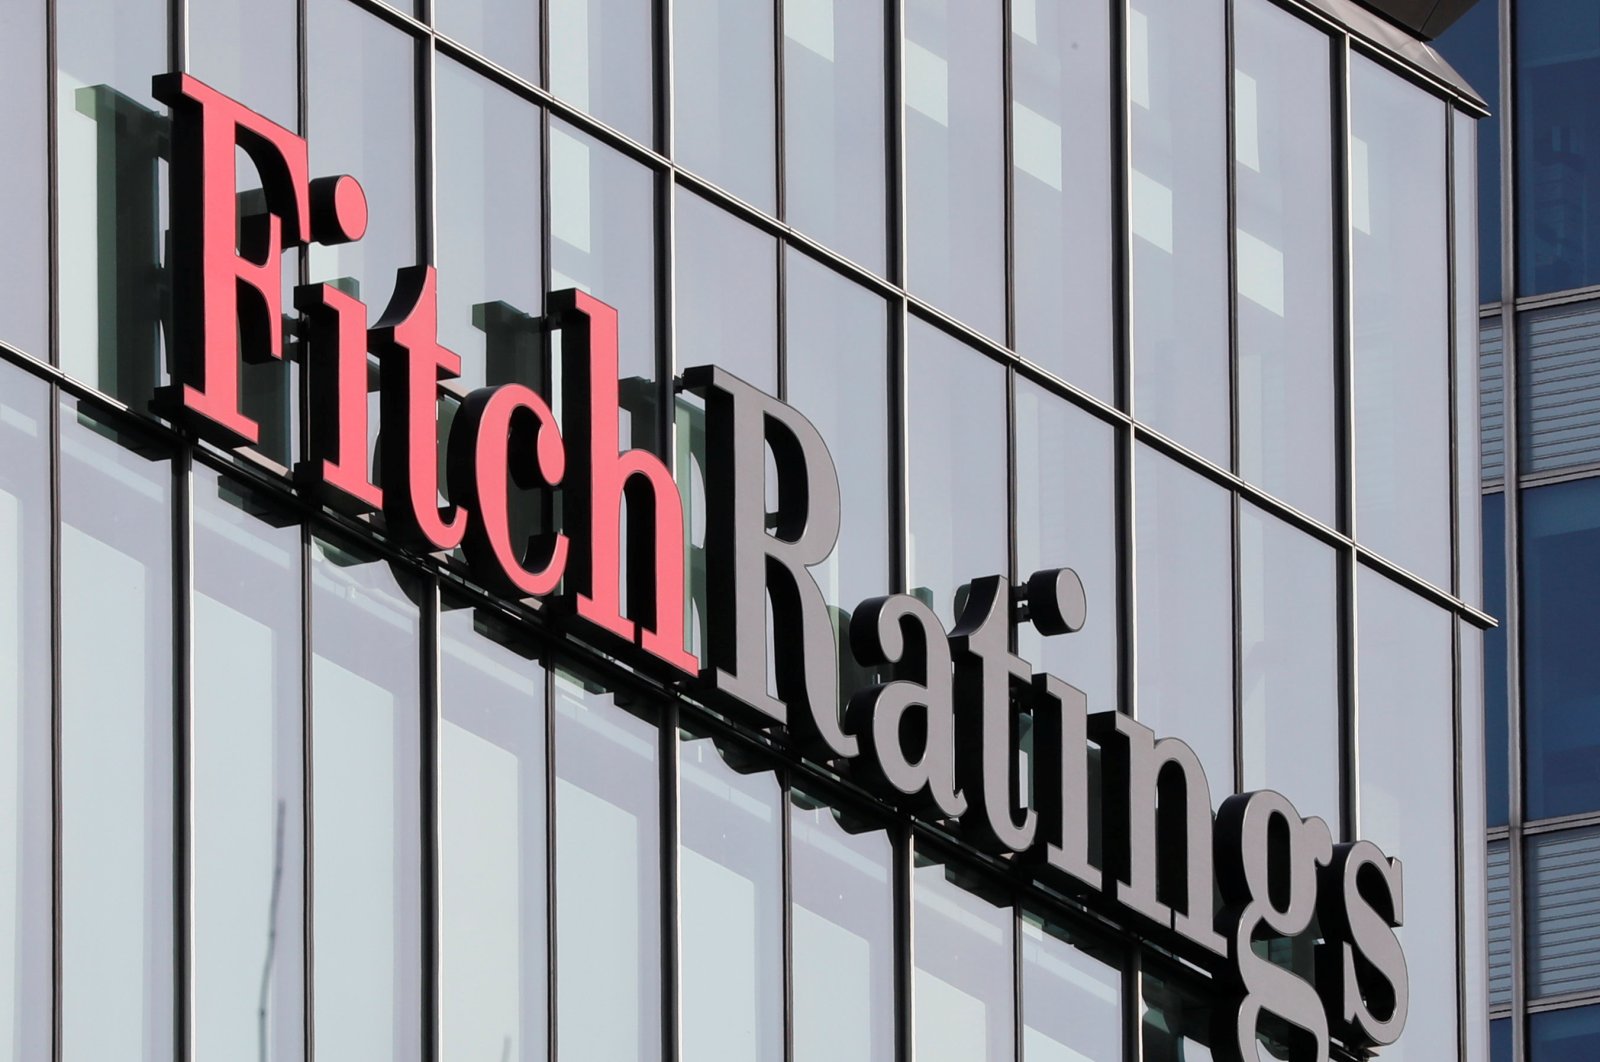 The Fitch Ratings logo is seen at their offices at Canary Wharf financial district in London, Britain, March 3, 2016. (Reuters Photo)